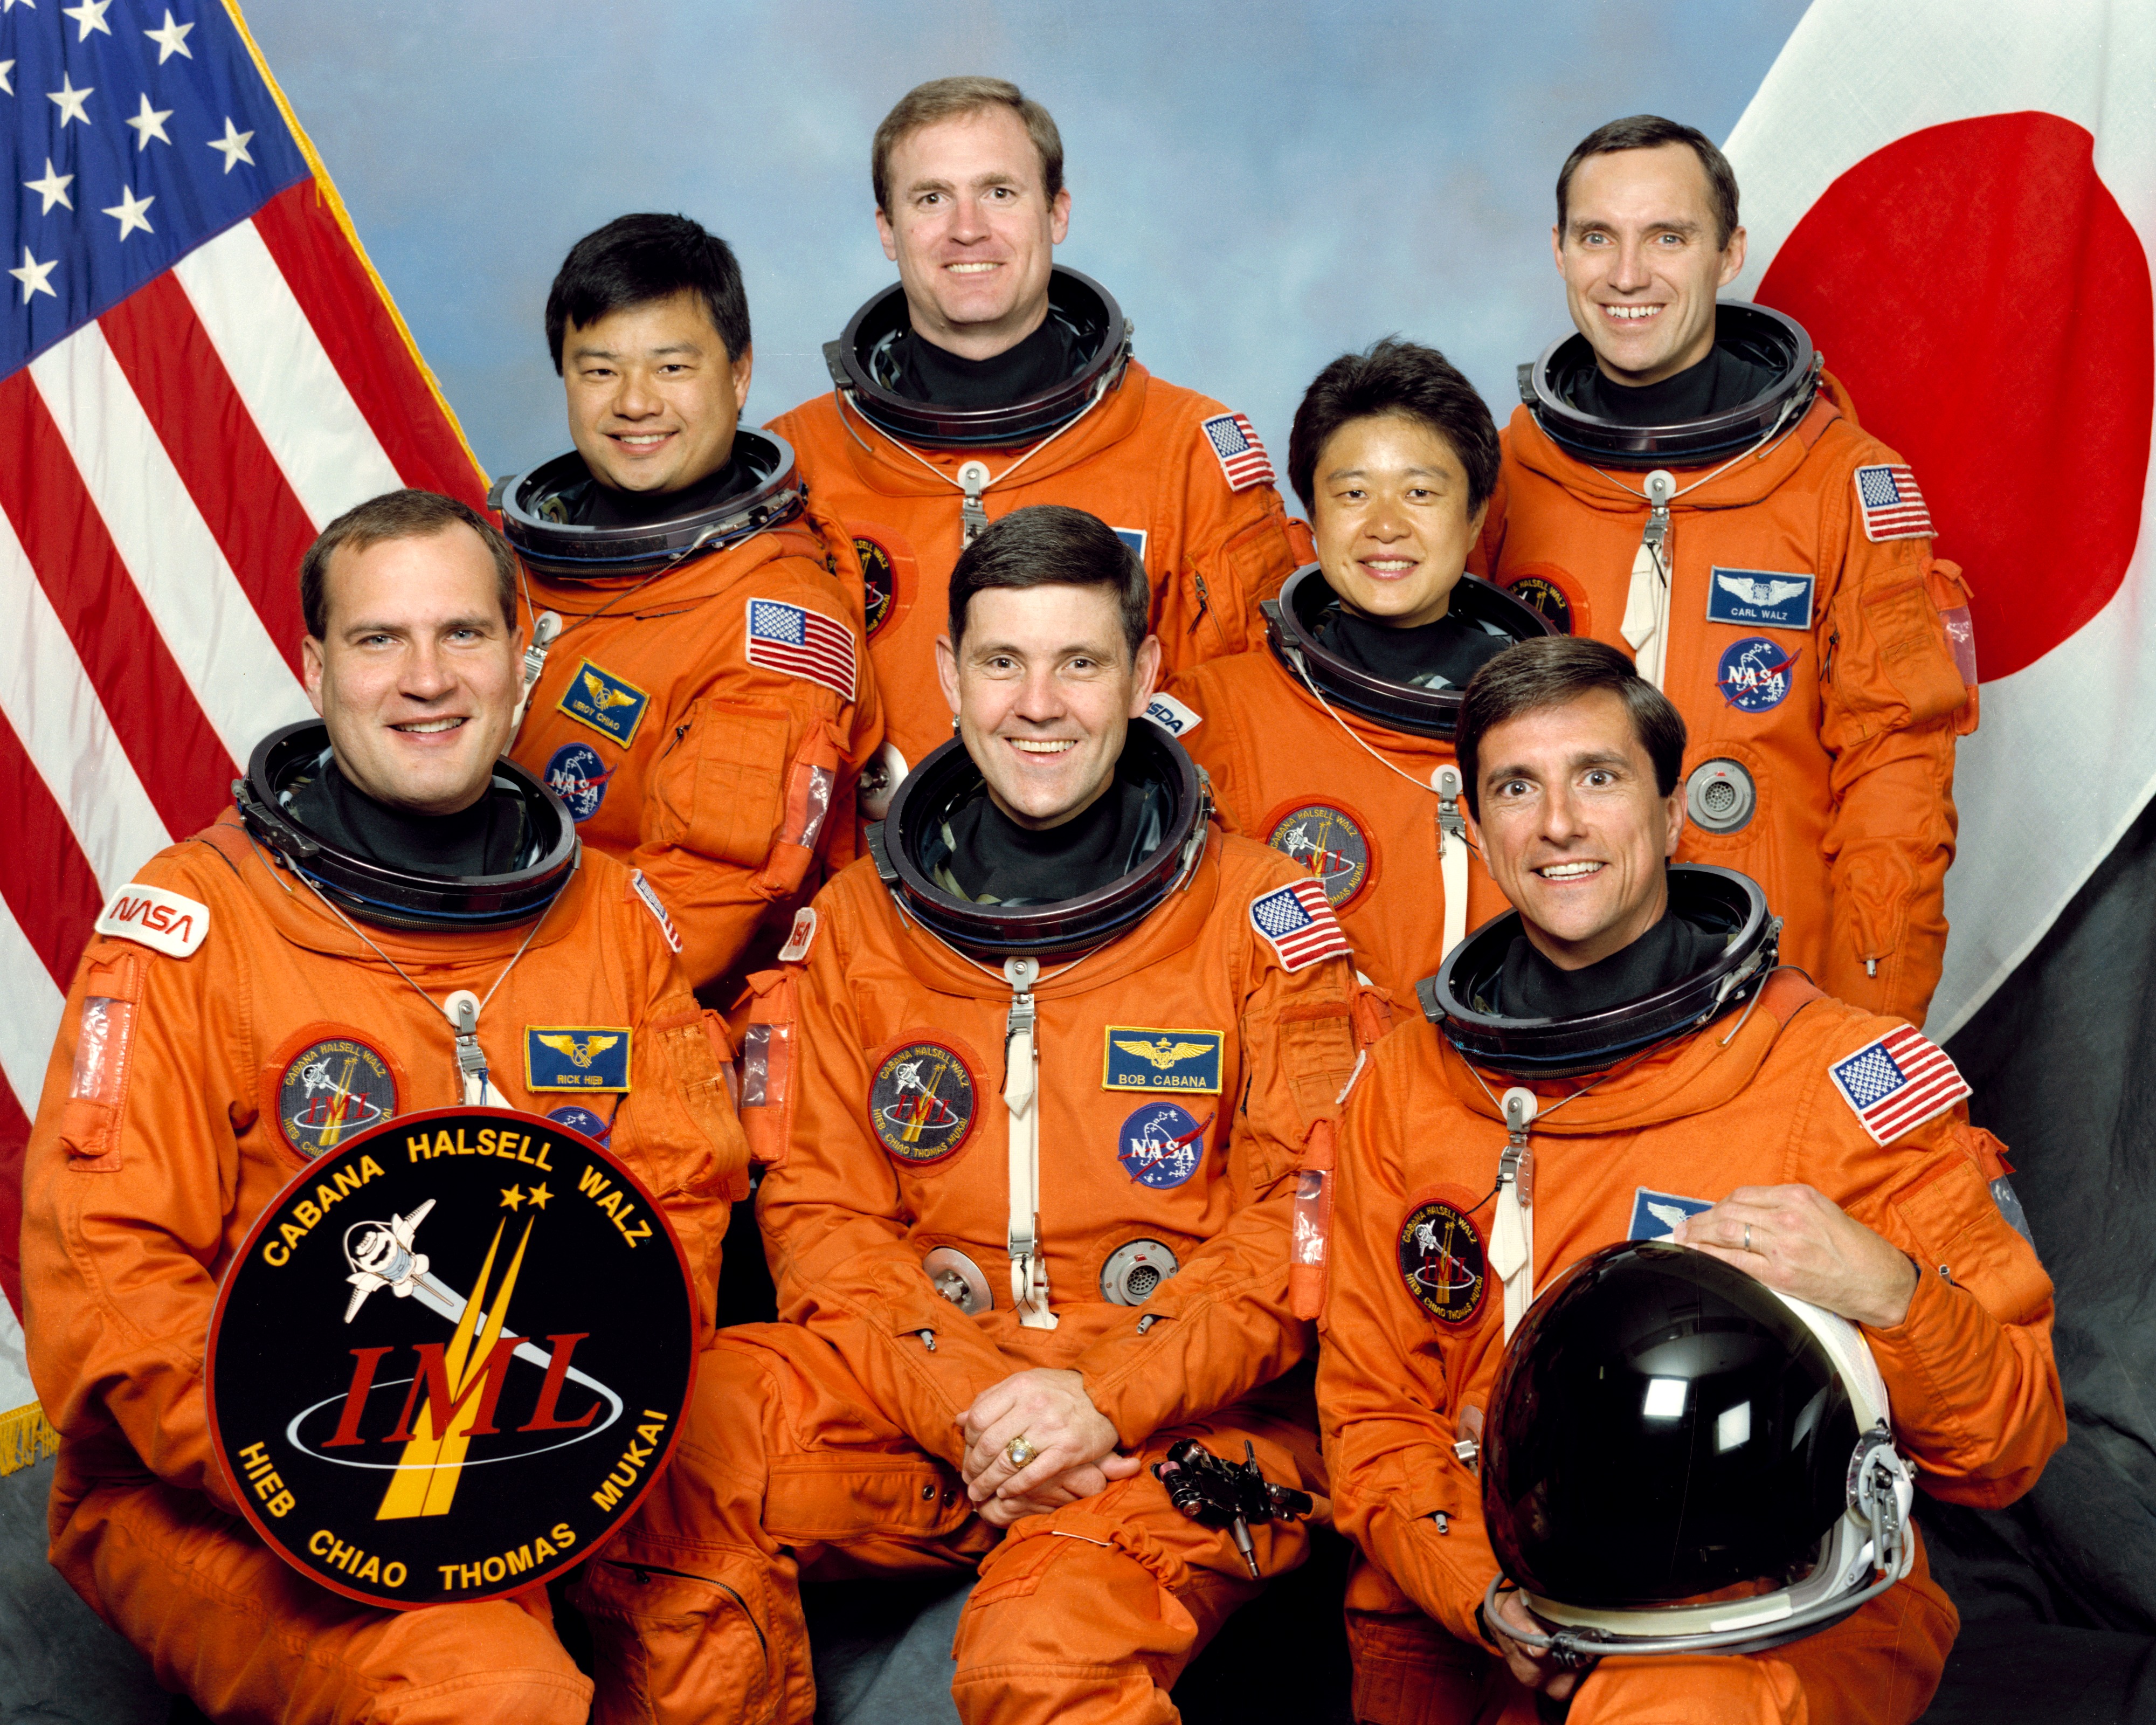 Official photo of the STS-65 crew of Richard J. Hieb, seated left, Robert D. Cabana, and Donald A. Thomas; Leroy Chiao, standing left, James D. Halsell, Chiaki Mukai of Japan, and Carl E. Walz